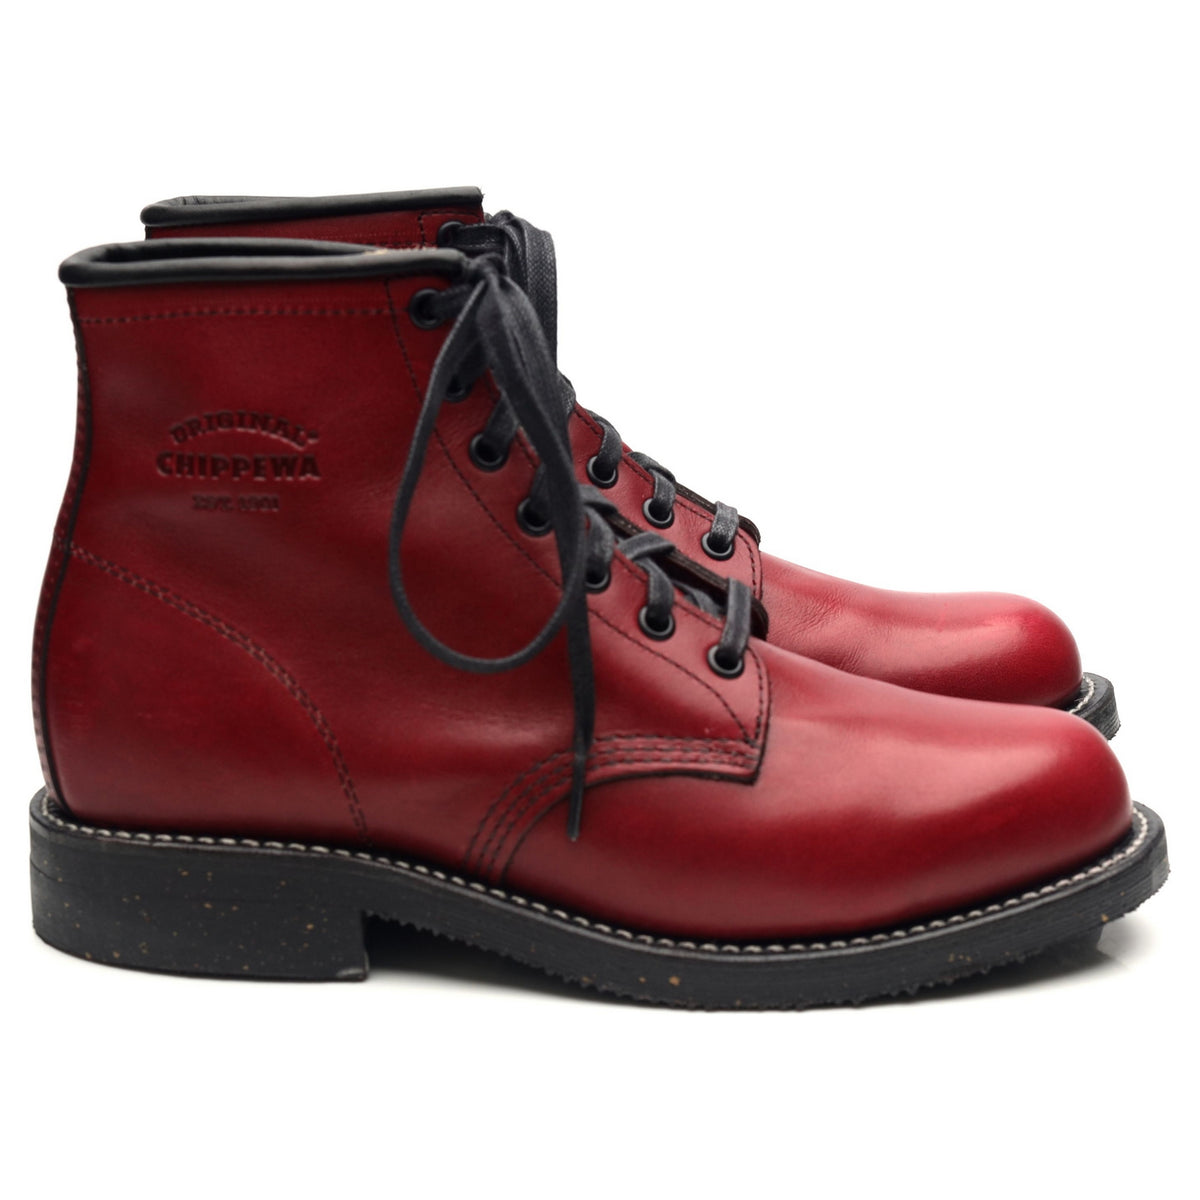 Red Leather Service Boots UK 6.5 US 7.5